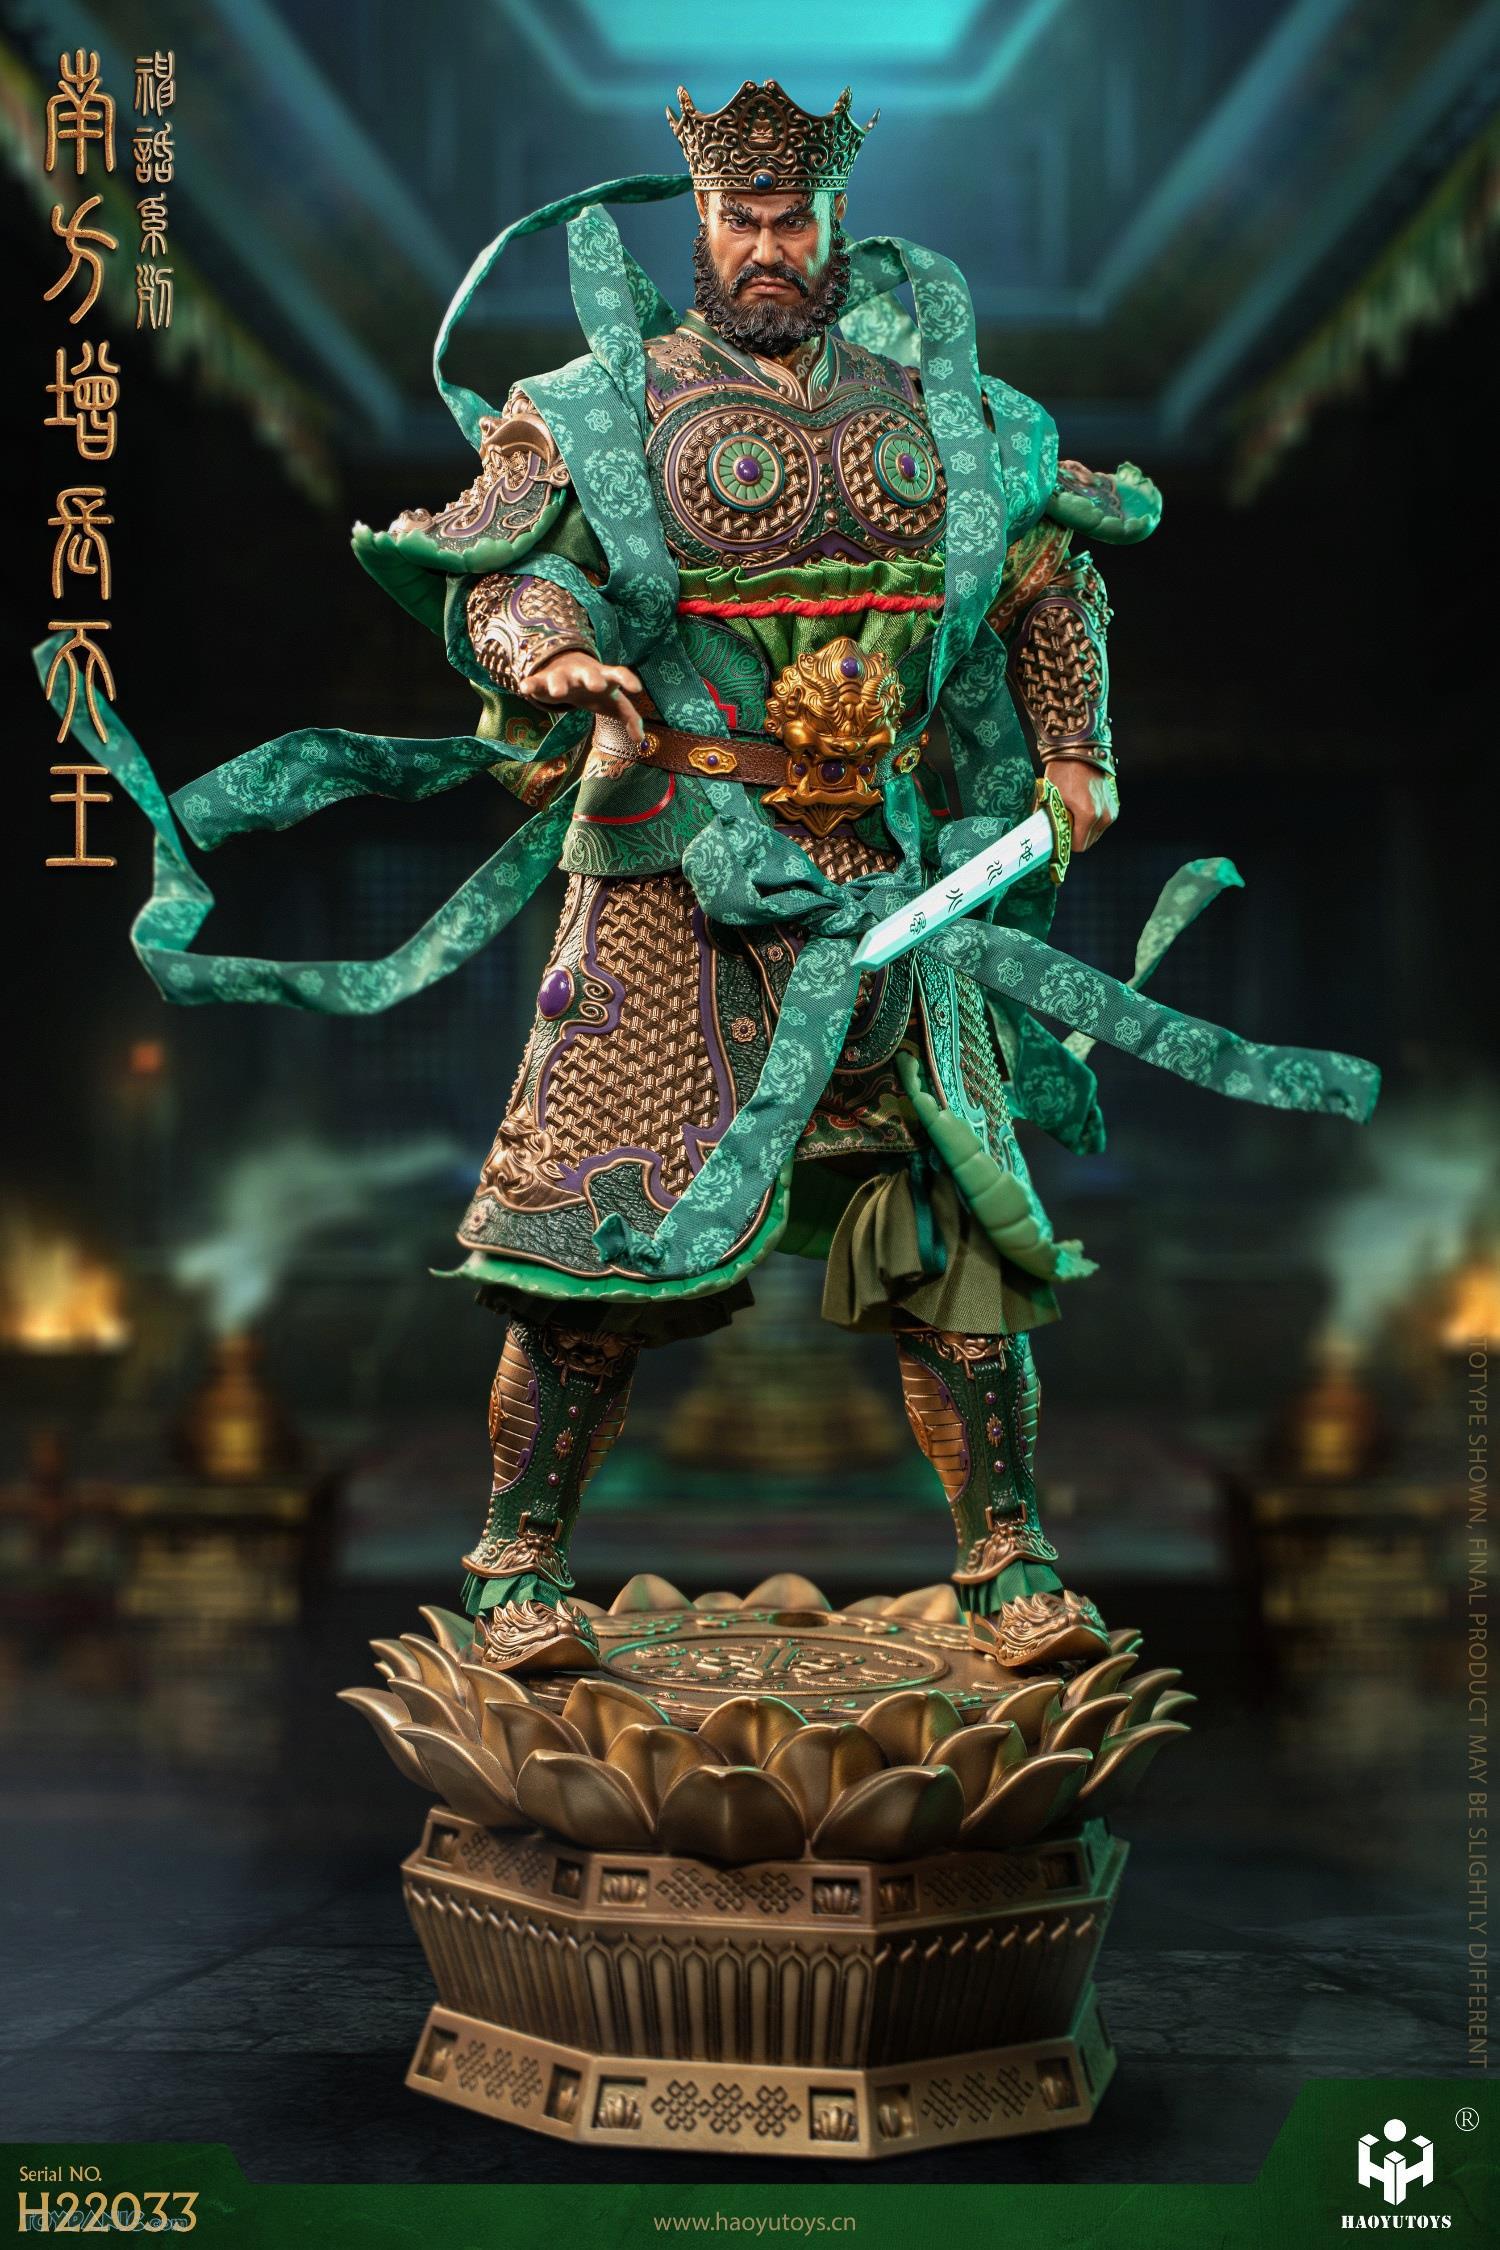 MythSeries - NEW PRODUCT: HaoYuToys 1/6 Myth Series Southern Growth King 212202451839PM_5563282